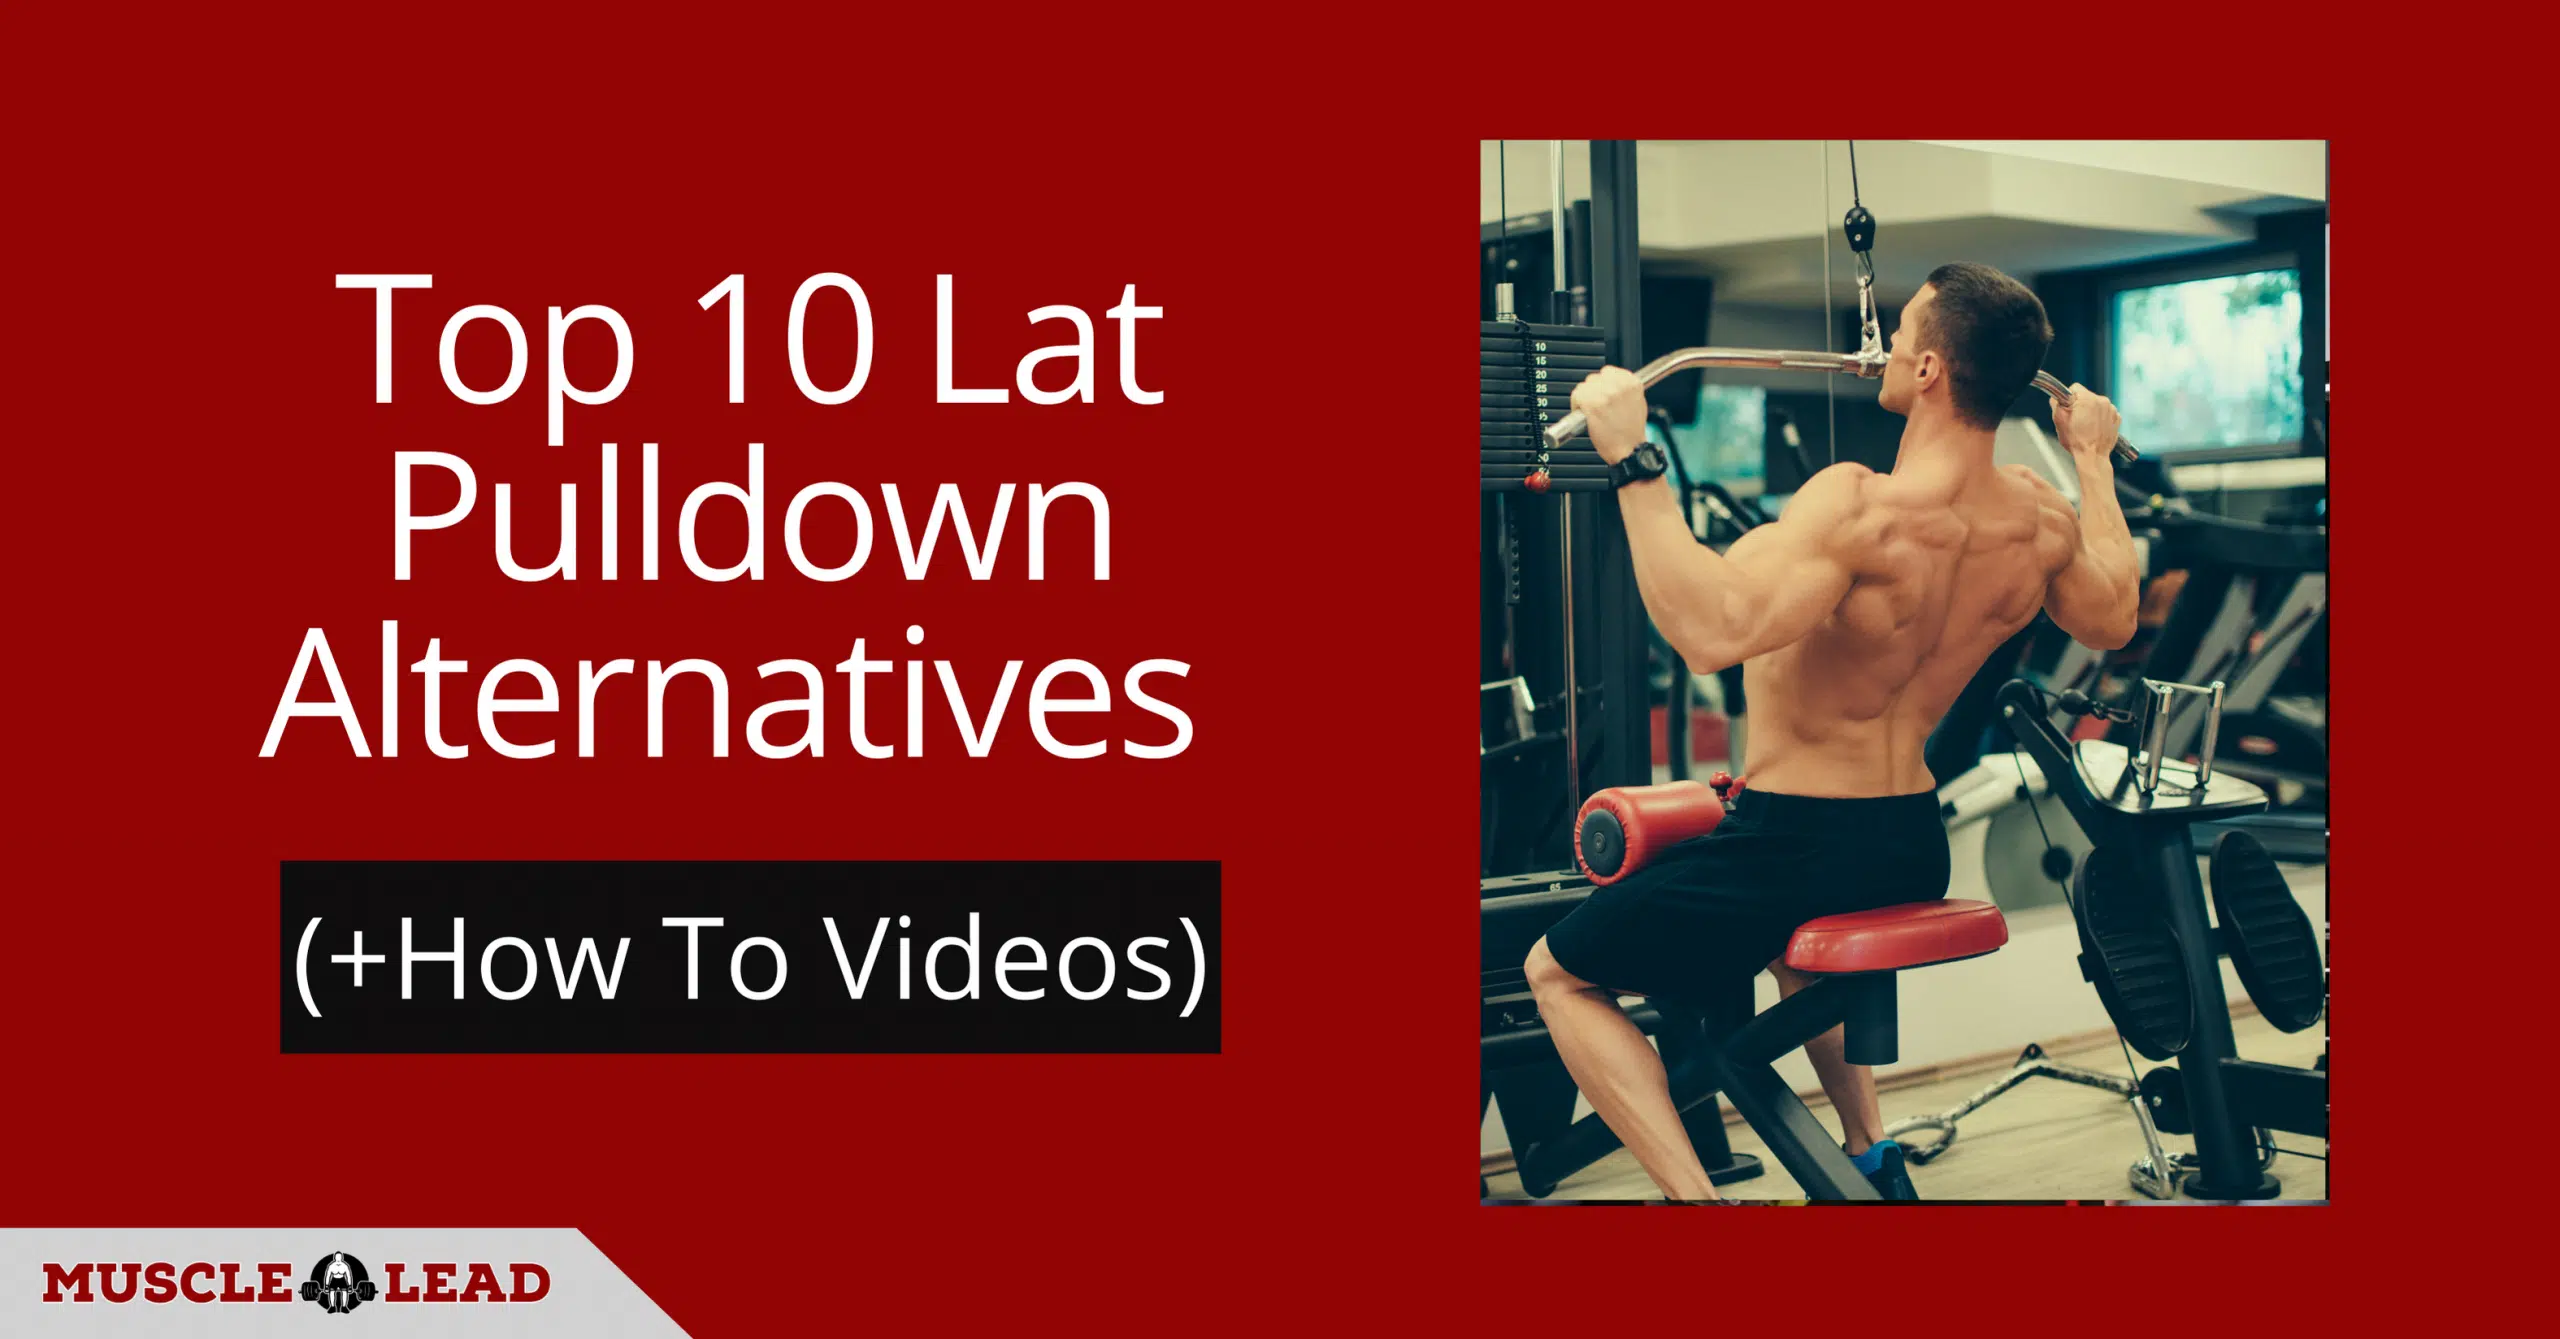 Top 10 Lat Pulldown Alternatives (+How To Videos)